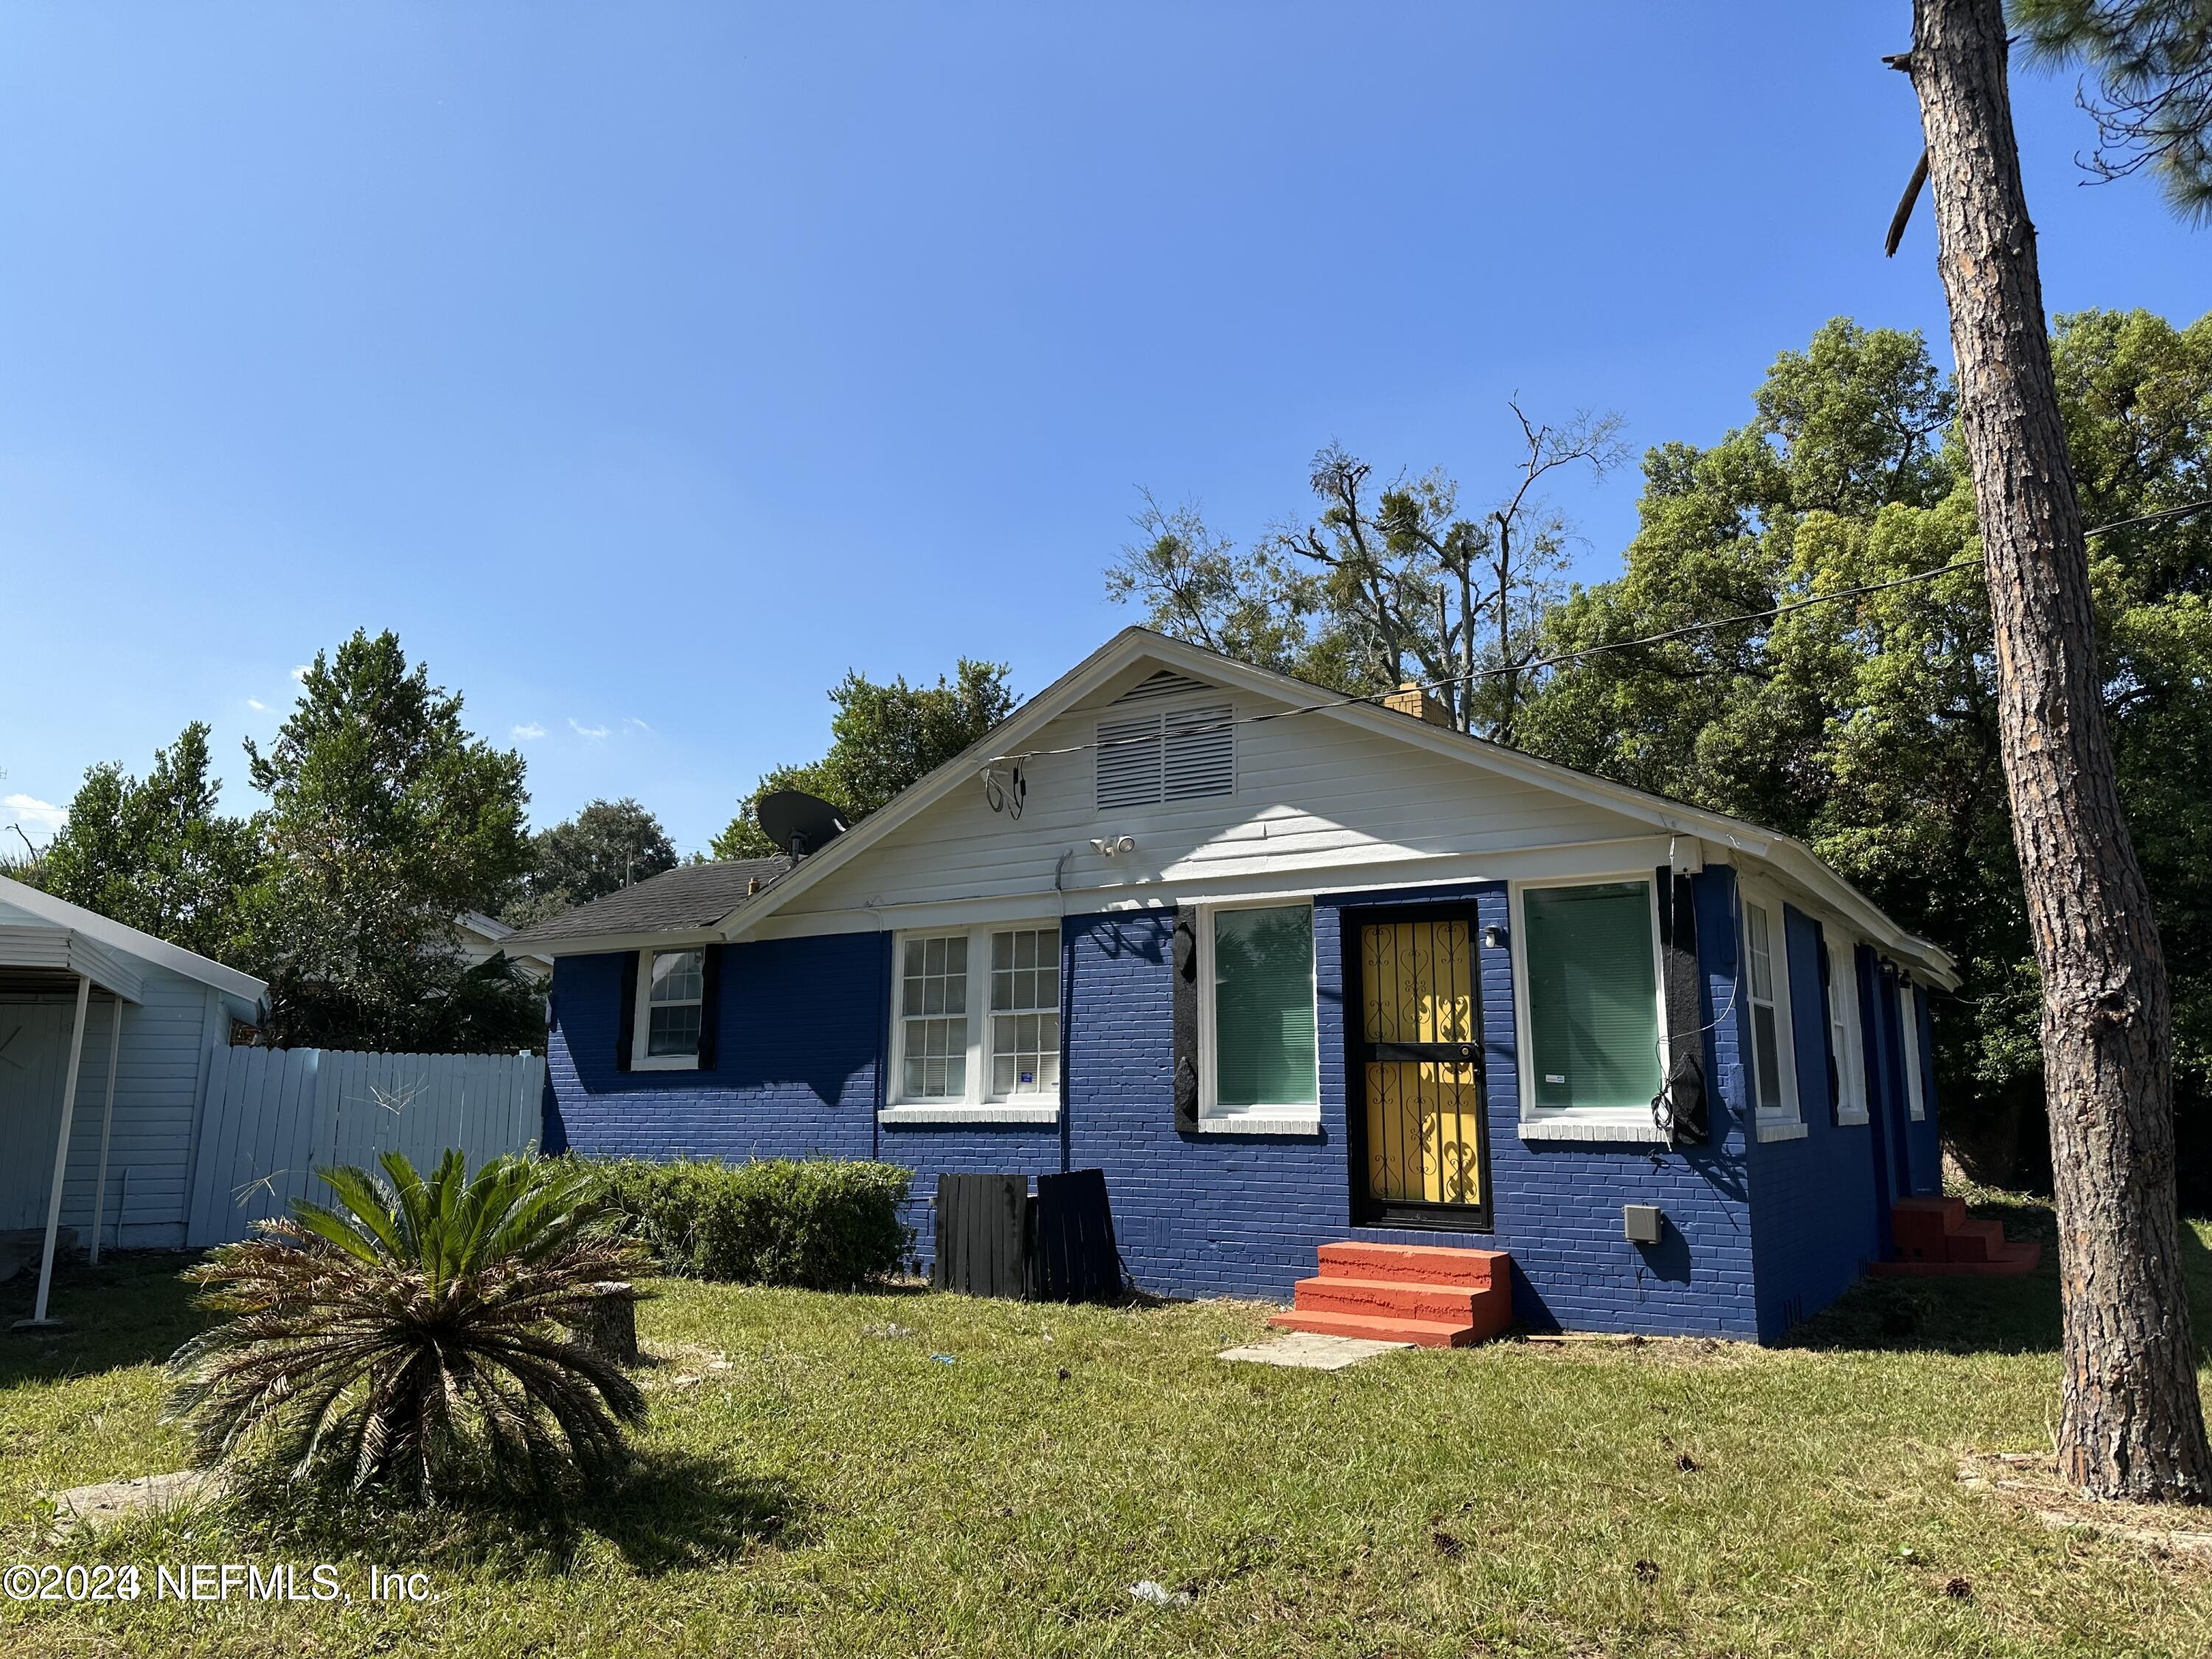 Jacksonville, FL home for sale located at 546 W 49th Street, Jacksonville, FL 32208